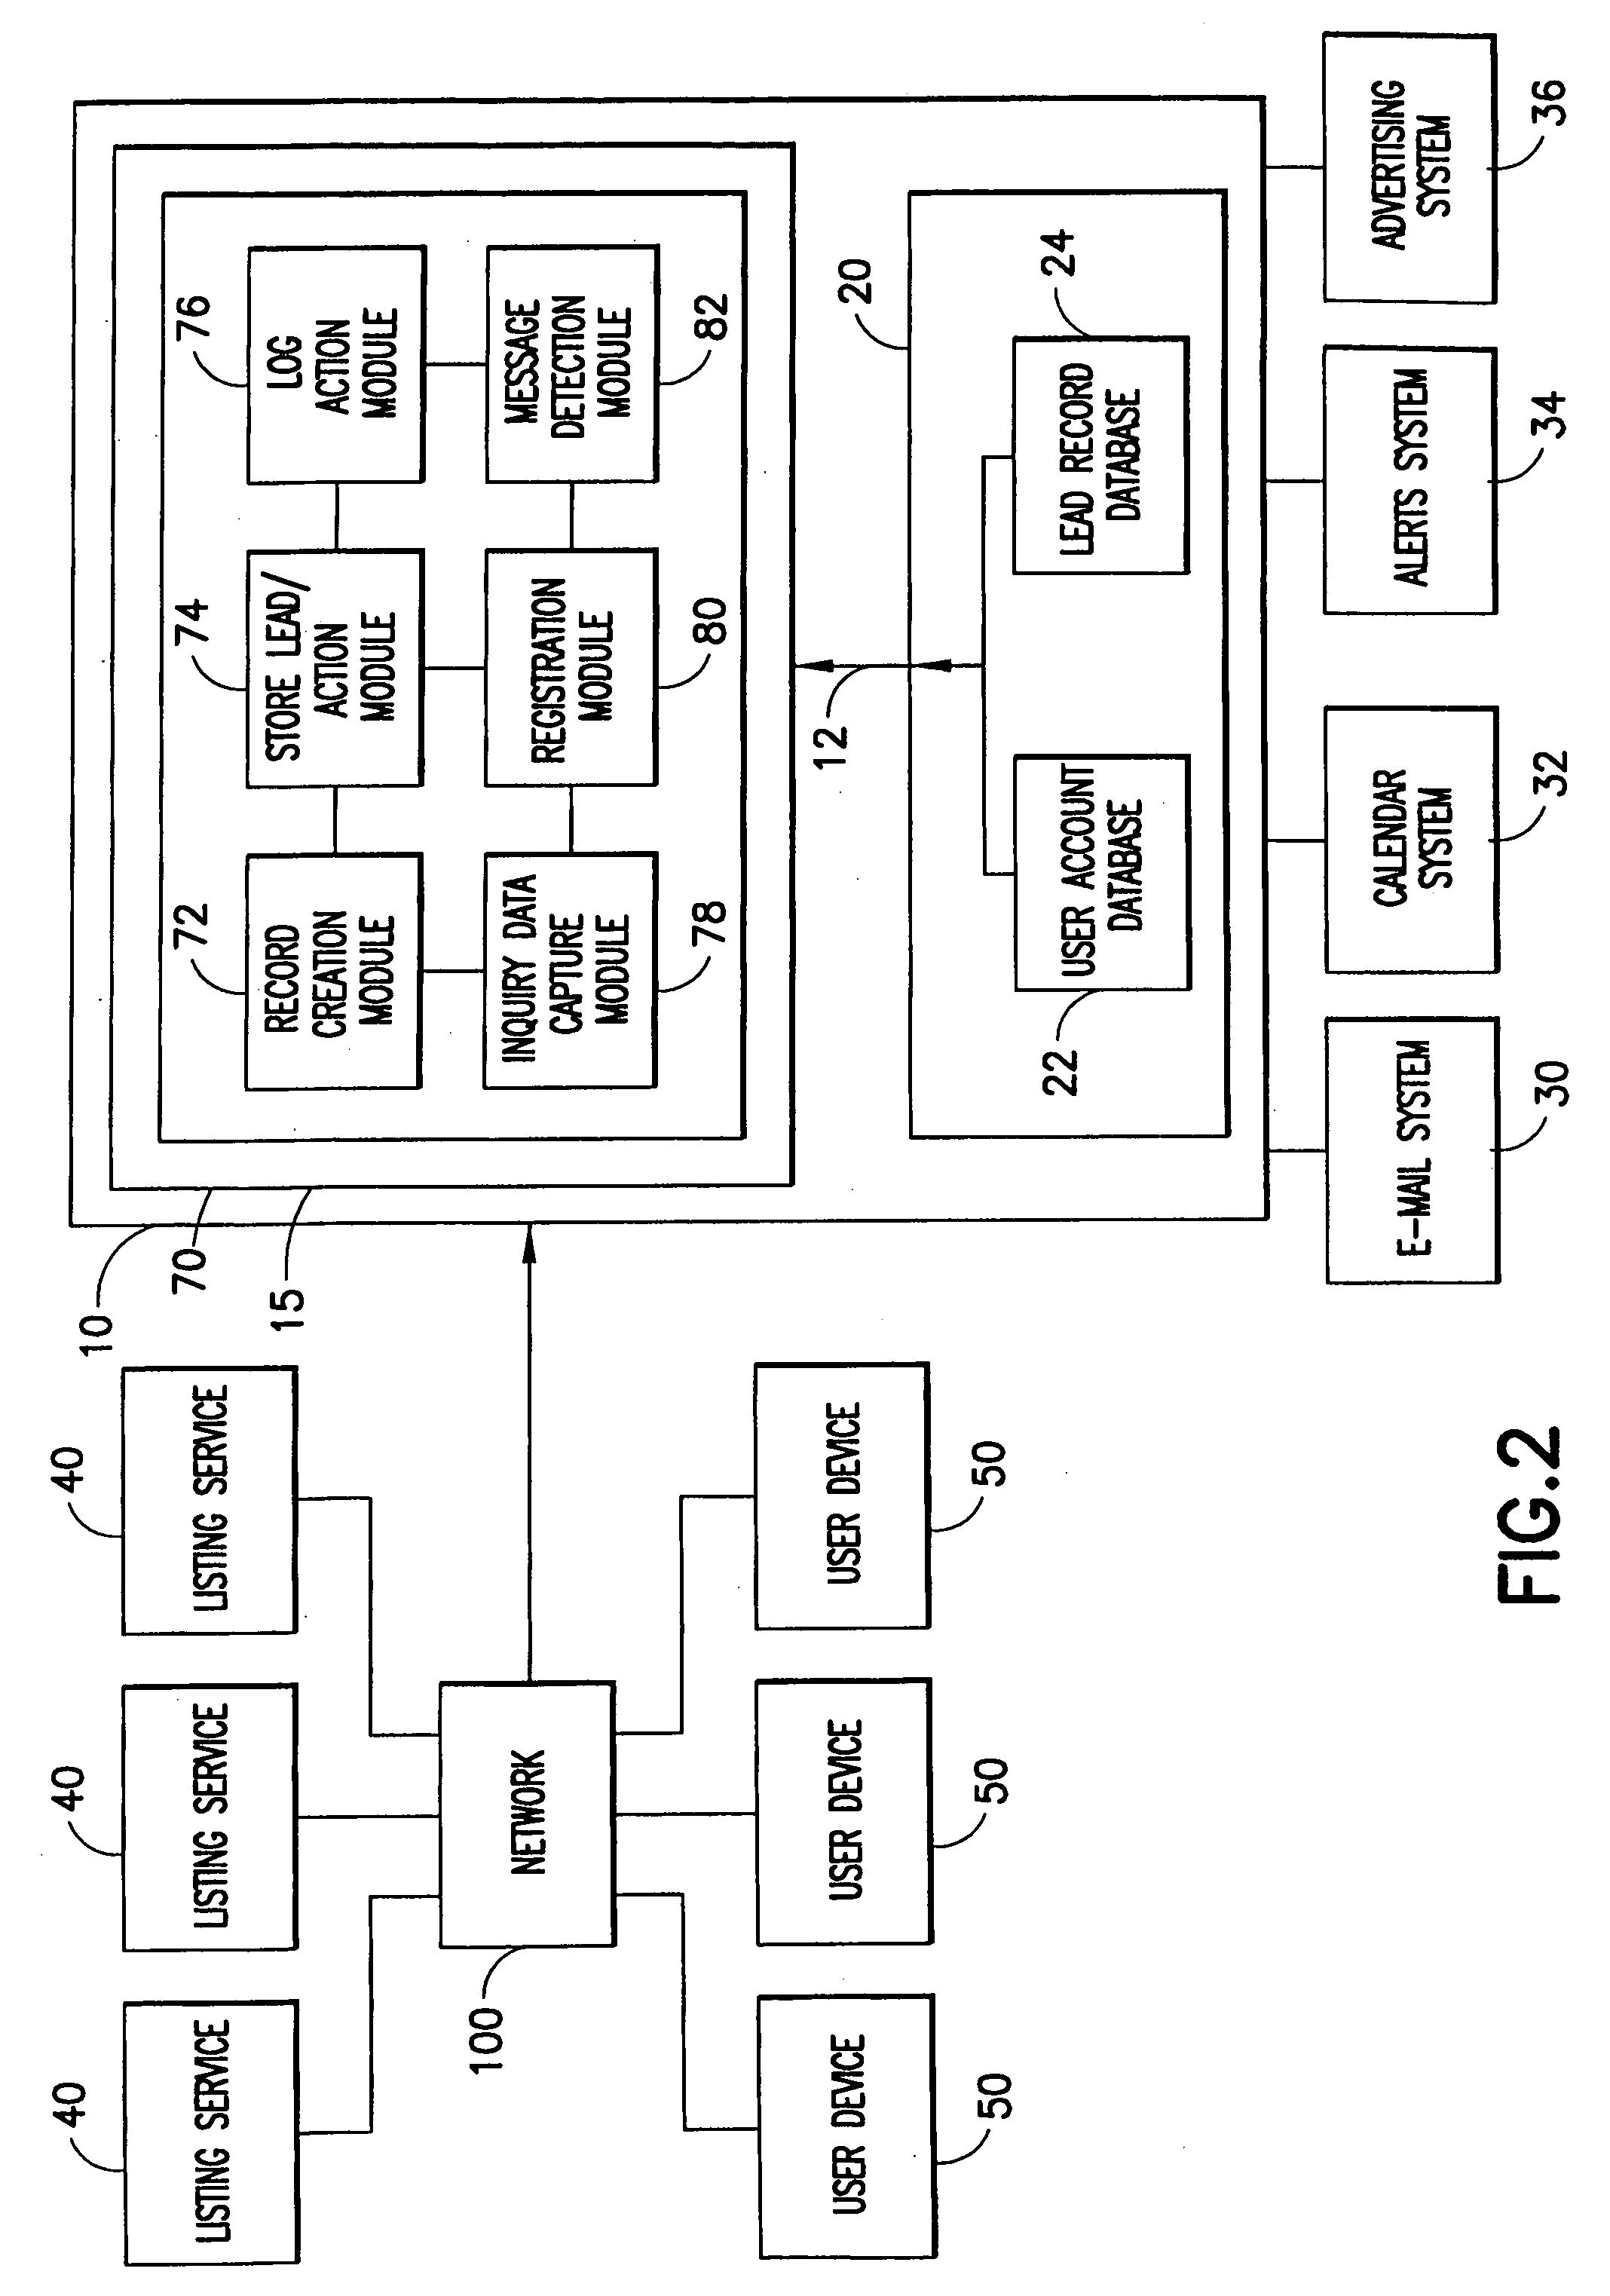 Listing service tracking system and method for tracking a user's interaction with a listing service